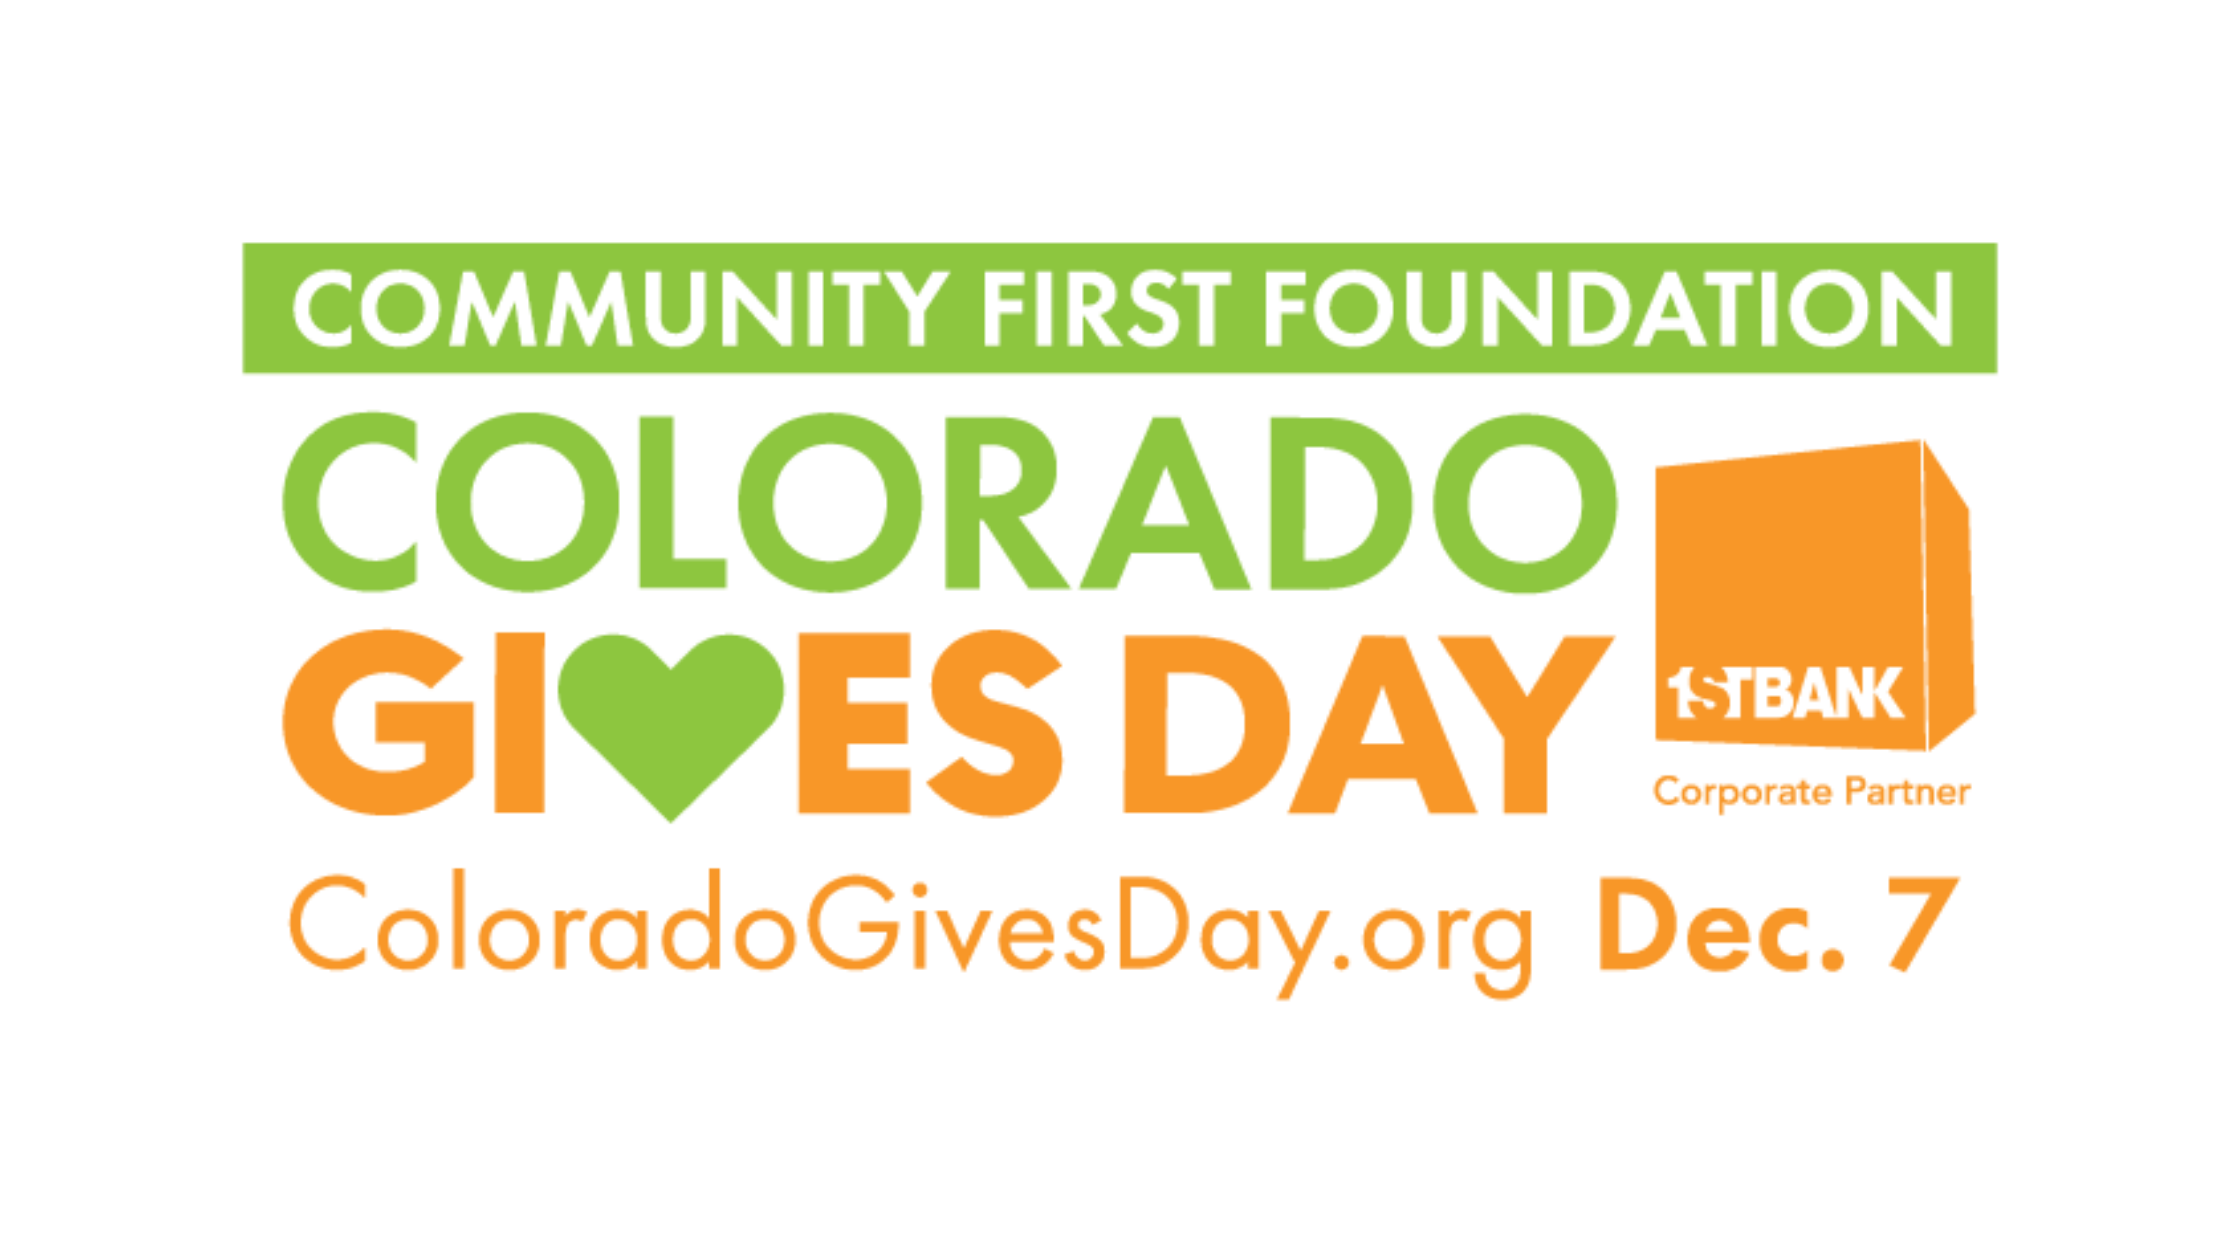 Support the Freedom to Connect this Colorado Gives Day Via Mobility